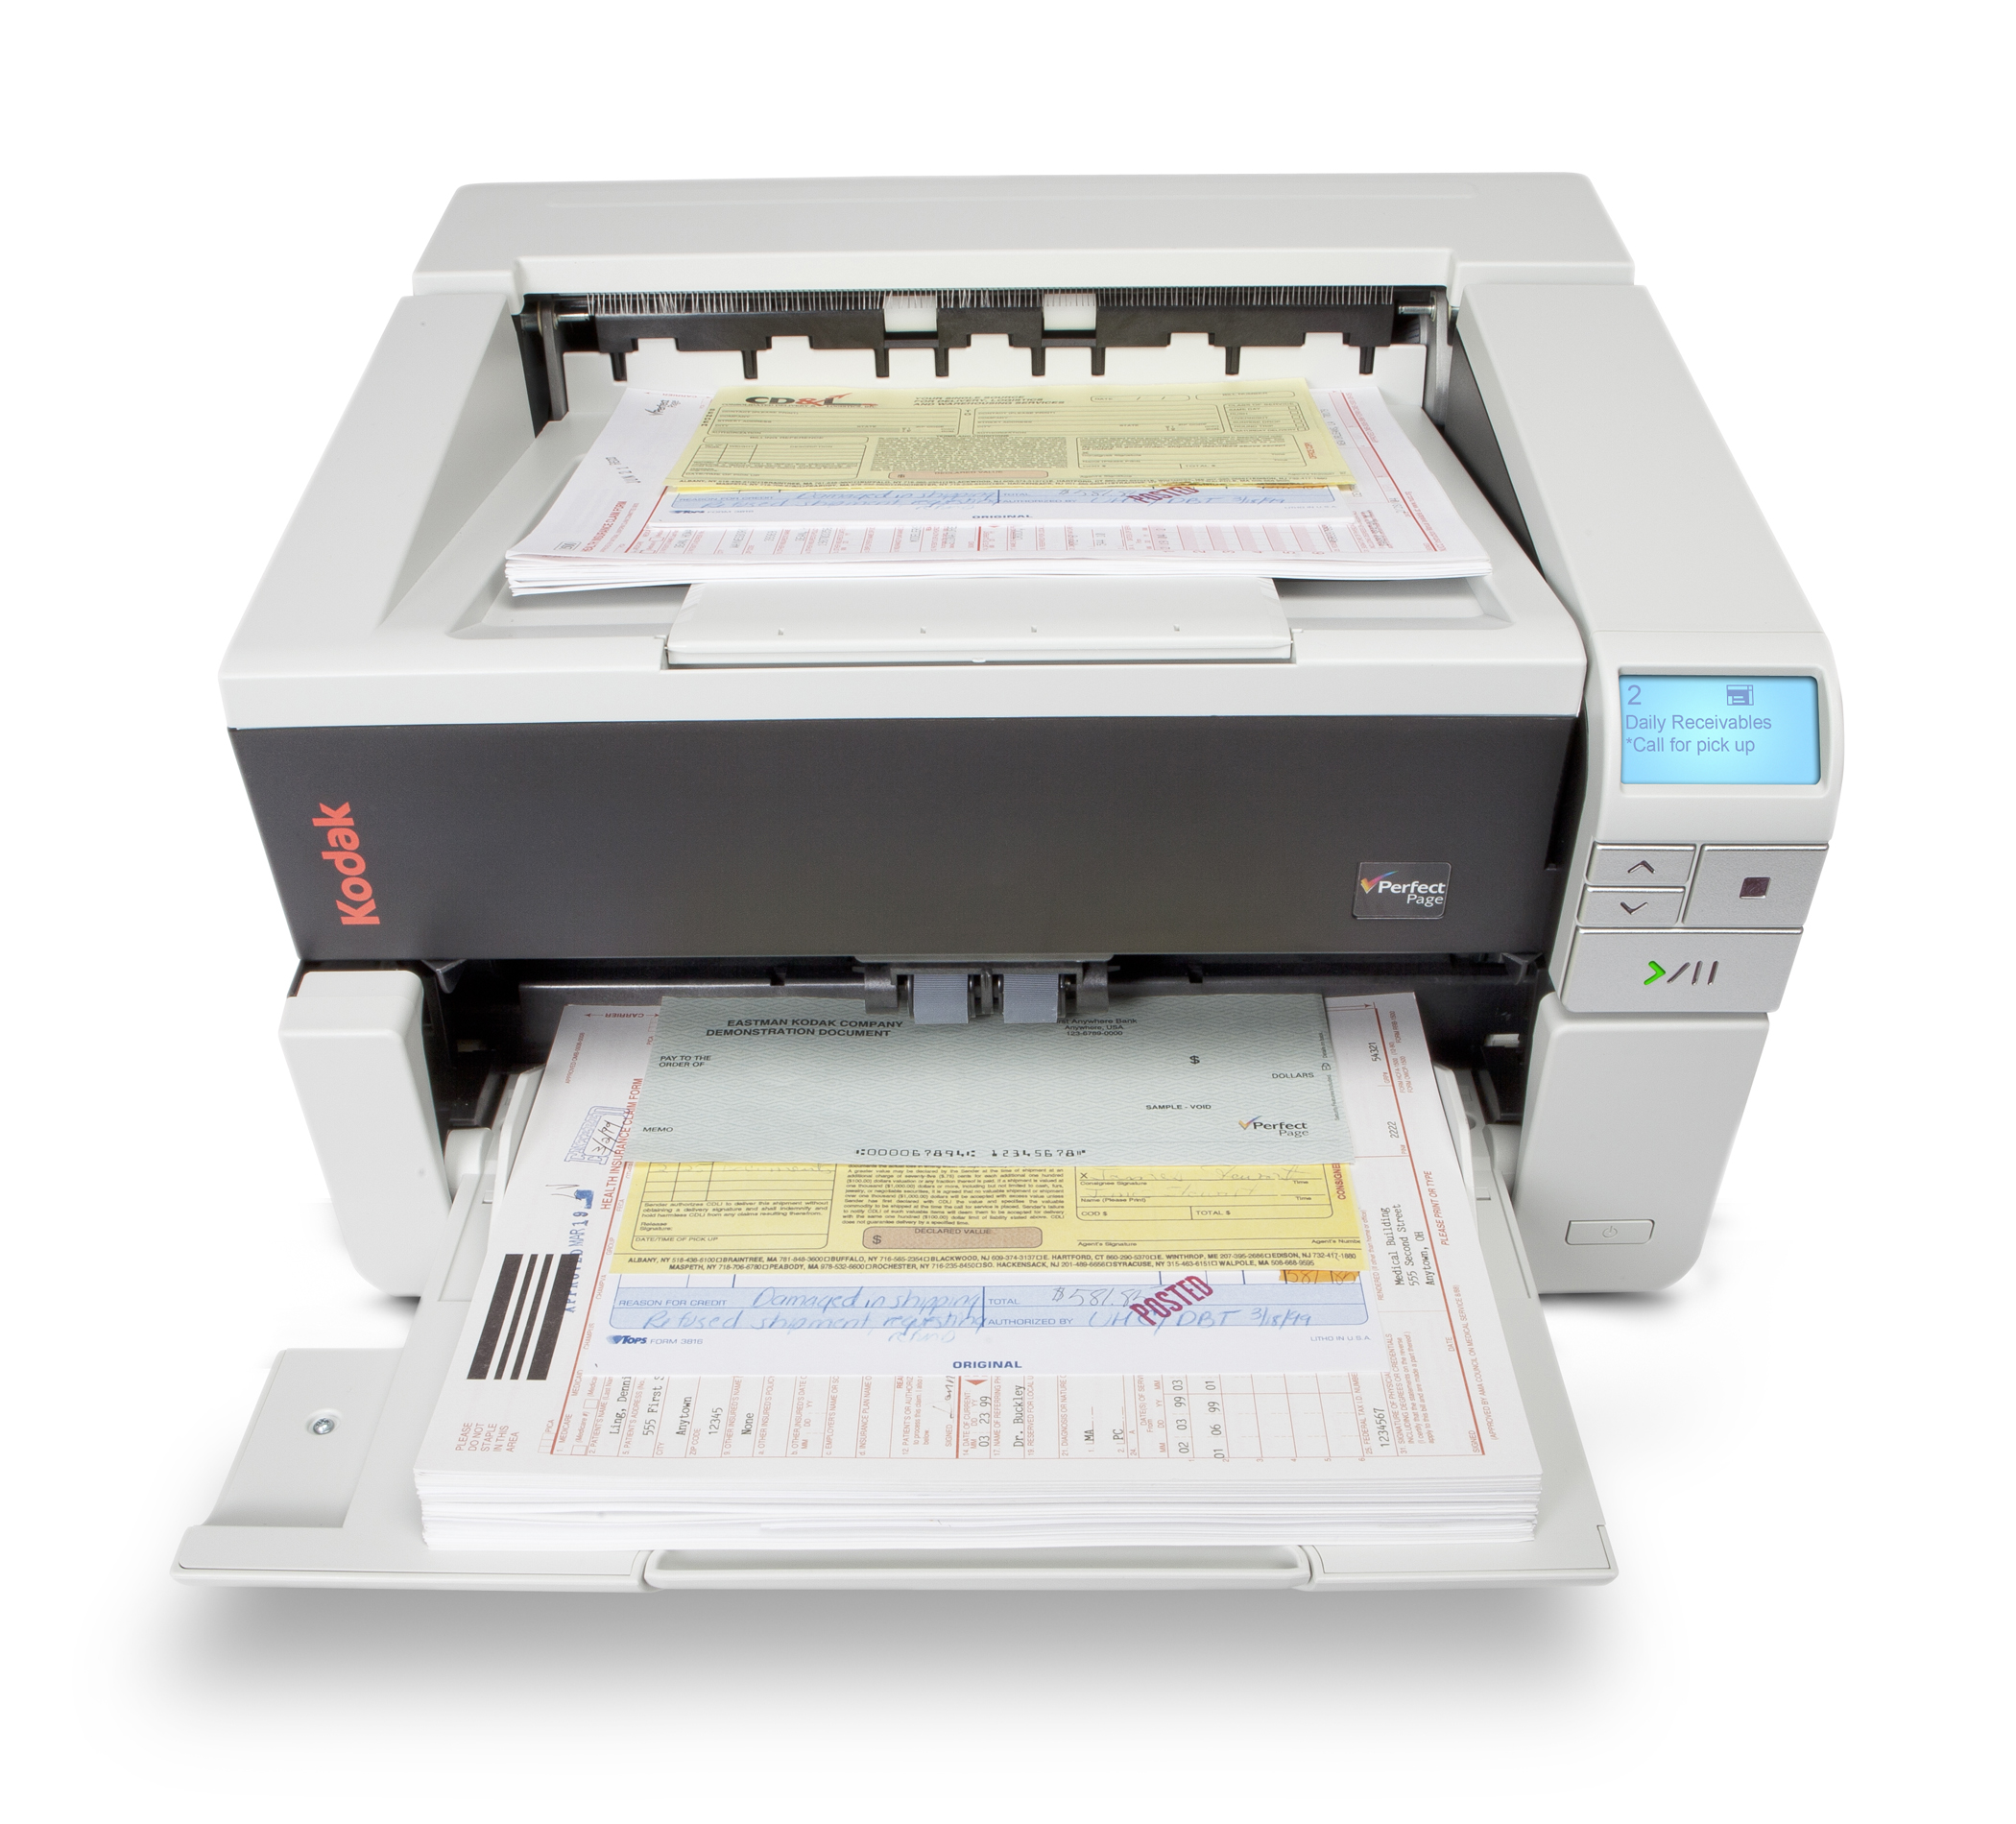 Kodak Alaris document scanner with unsorted documents for scanning